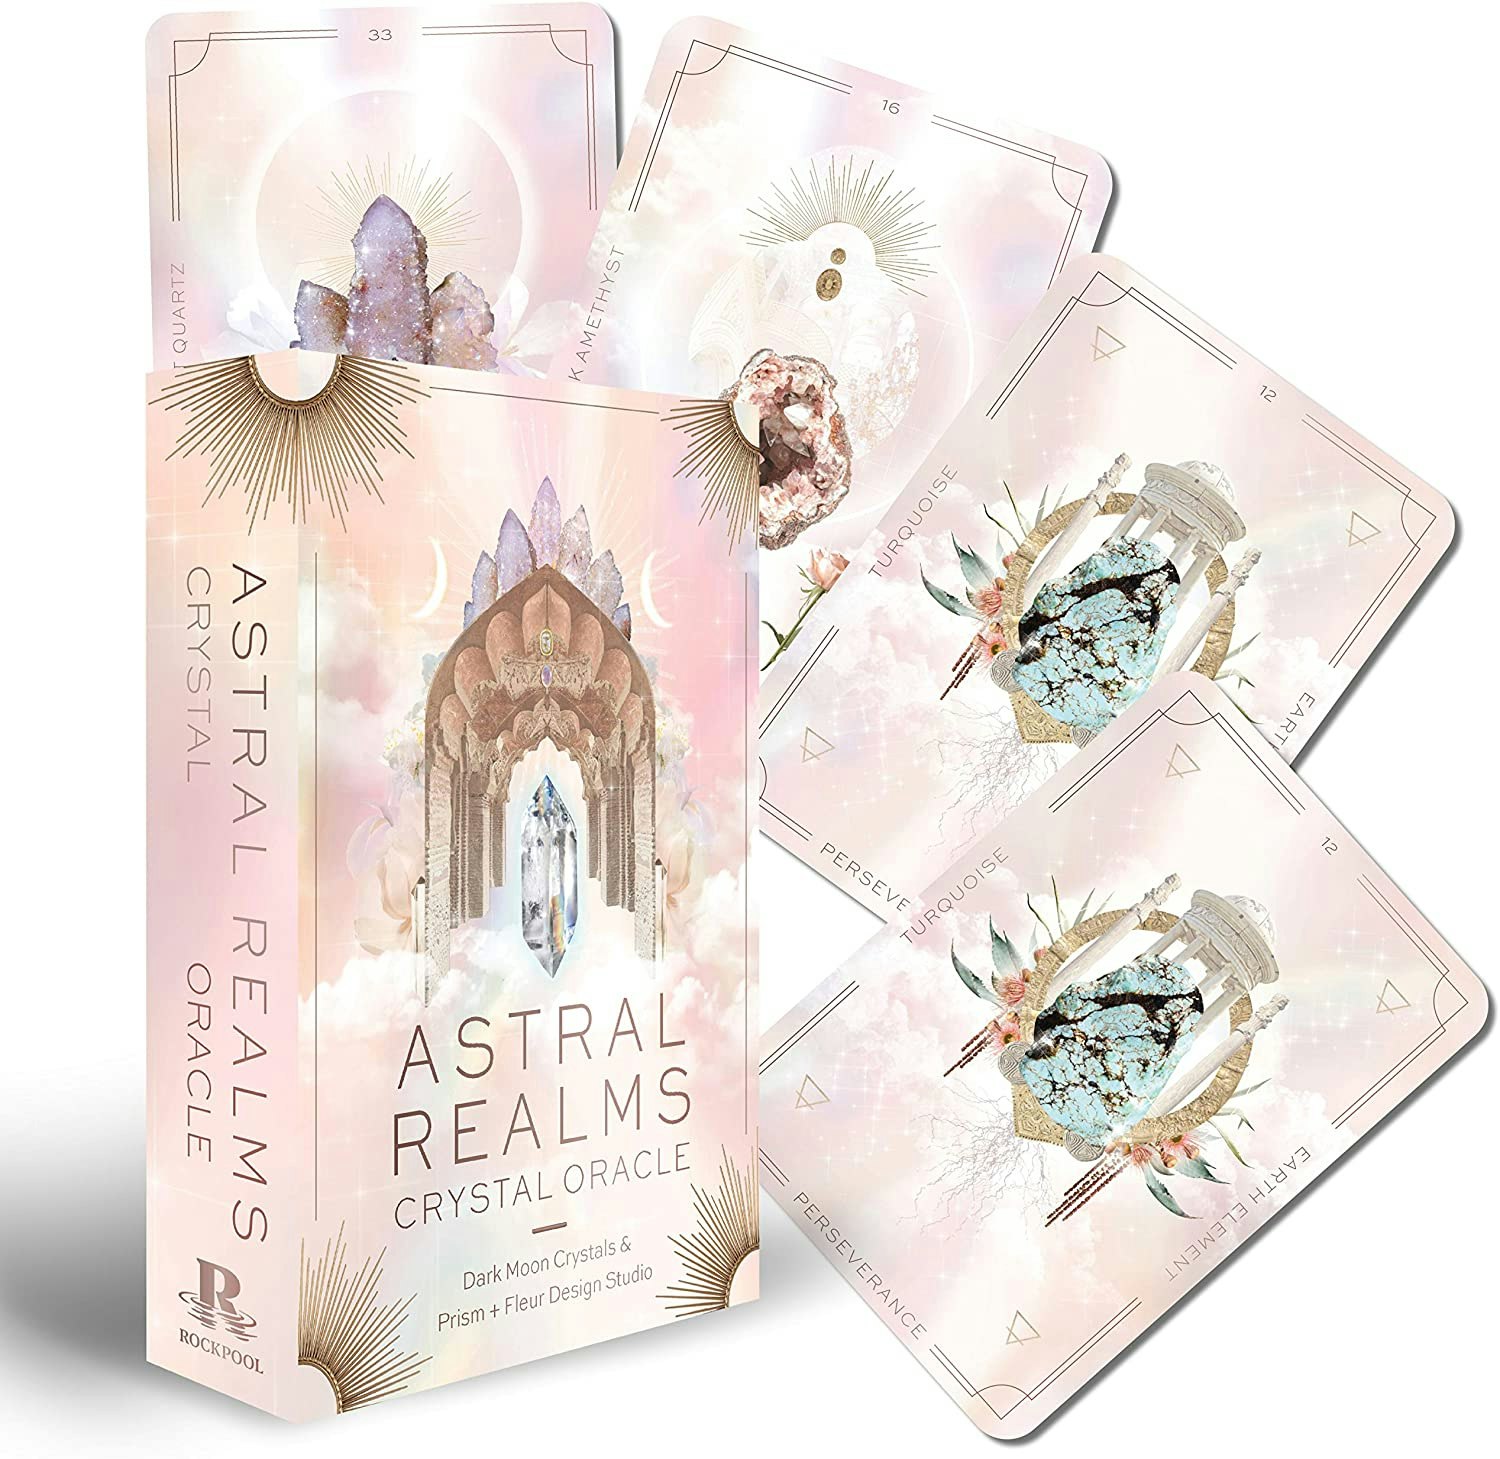 Astral realms crystal oracle cards